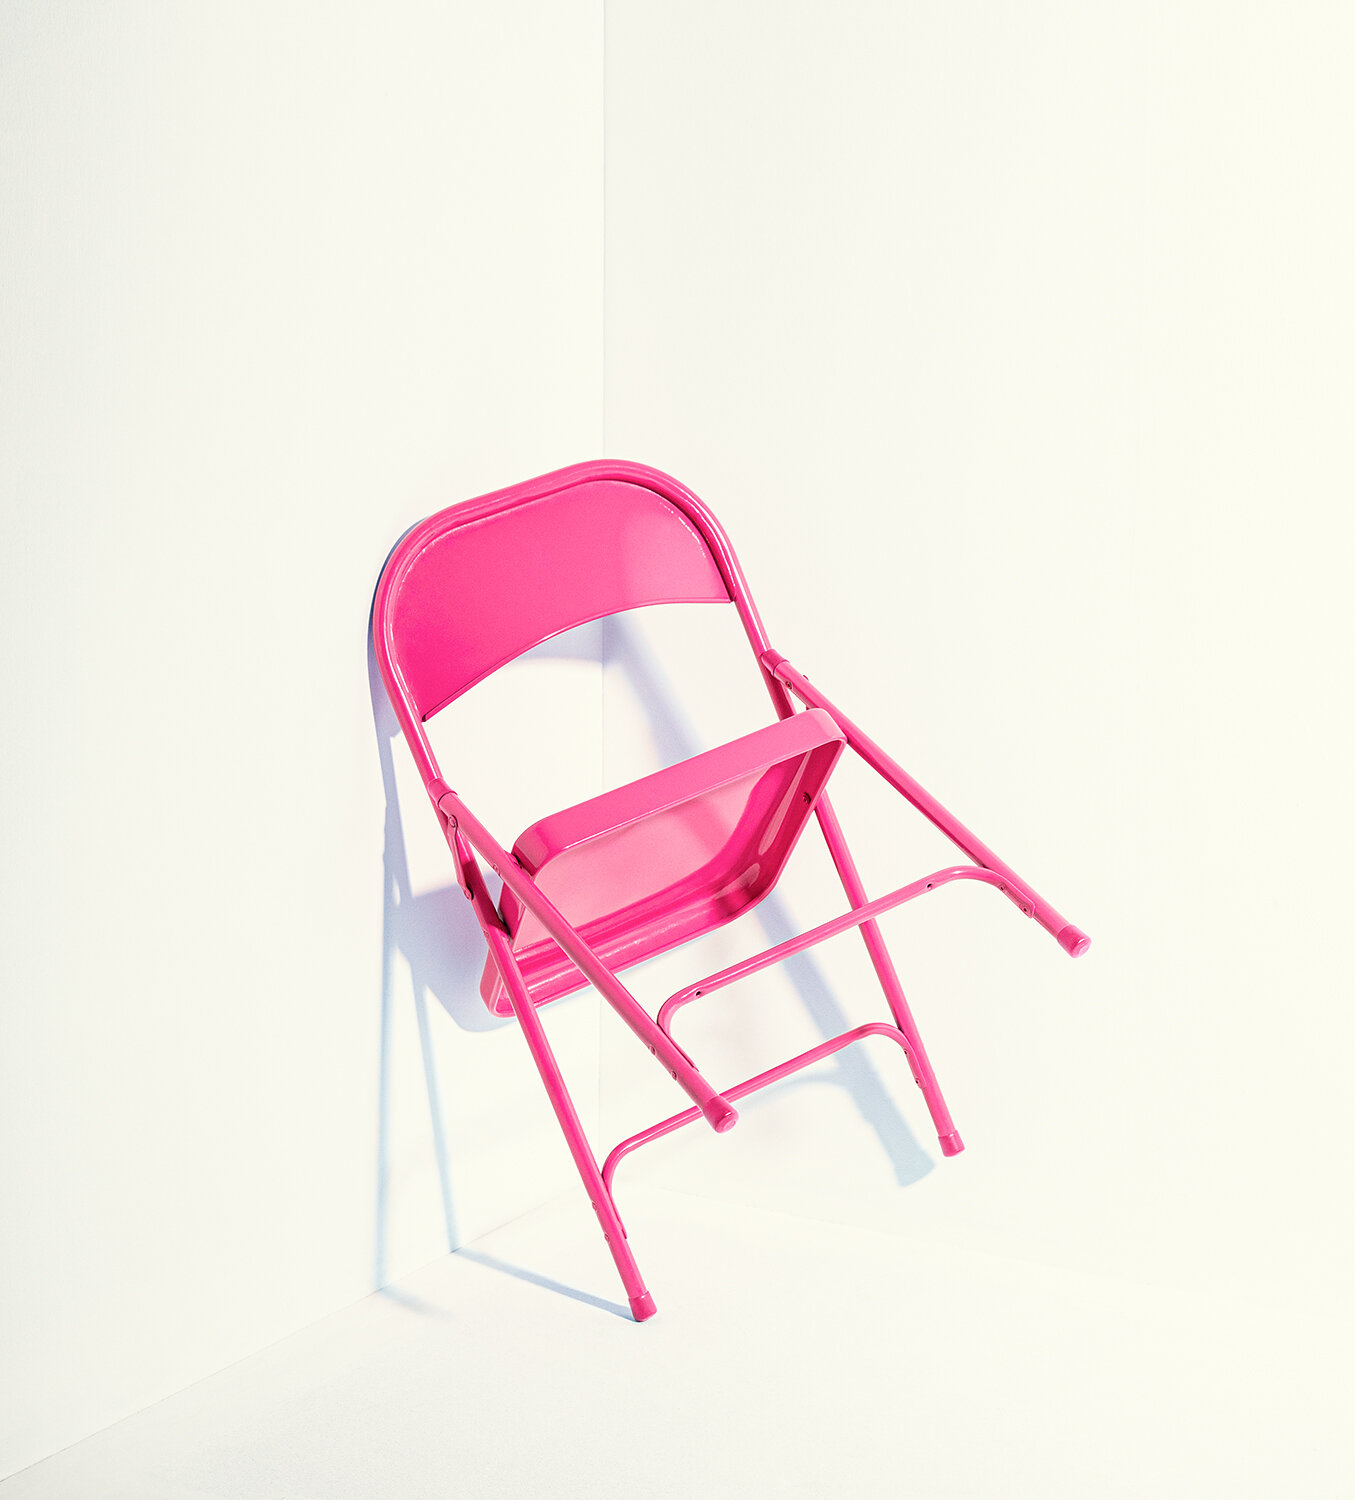  pink chair 1 